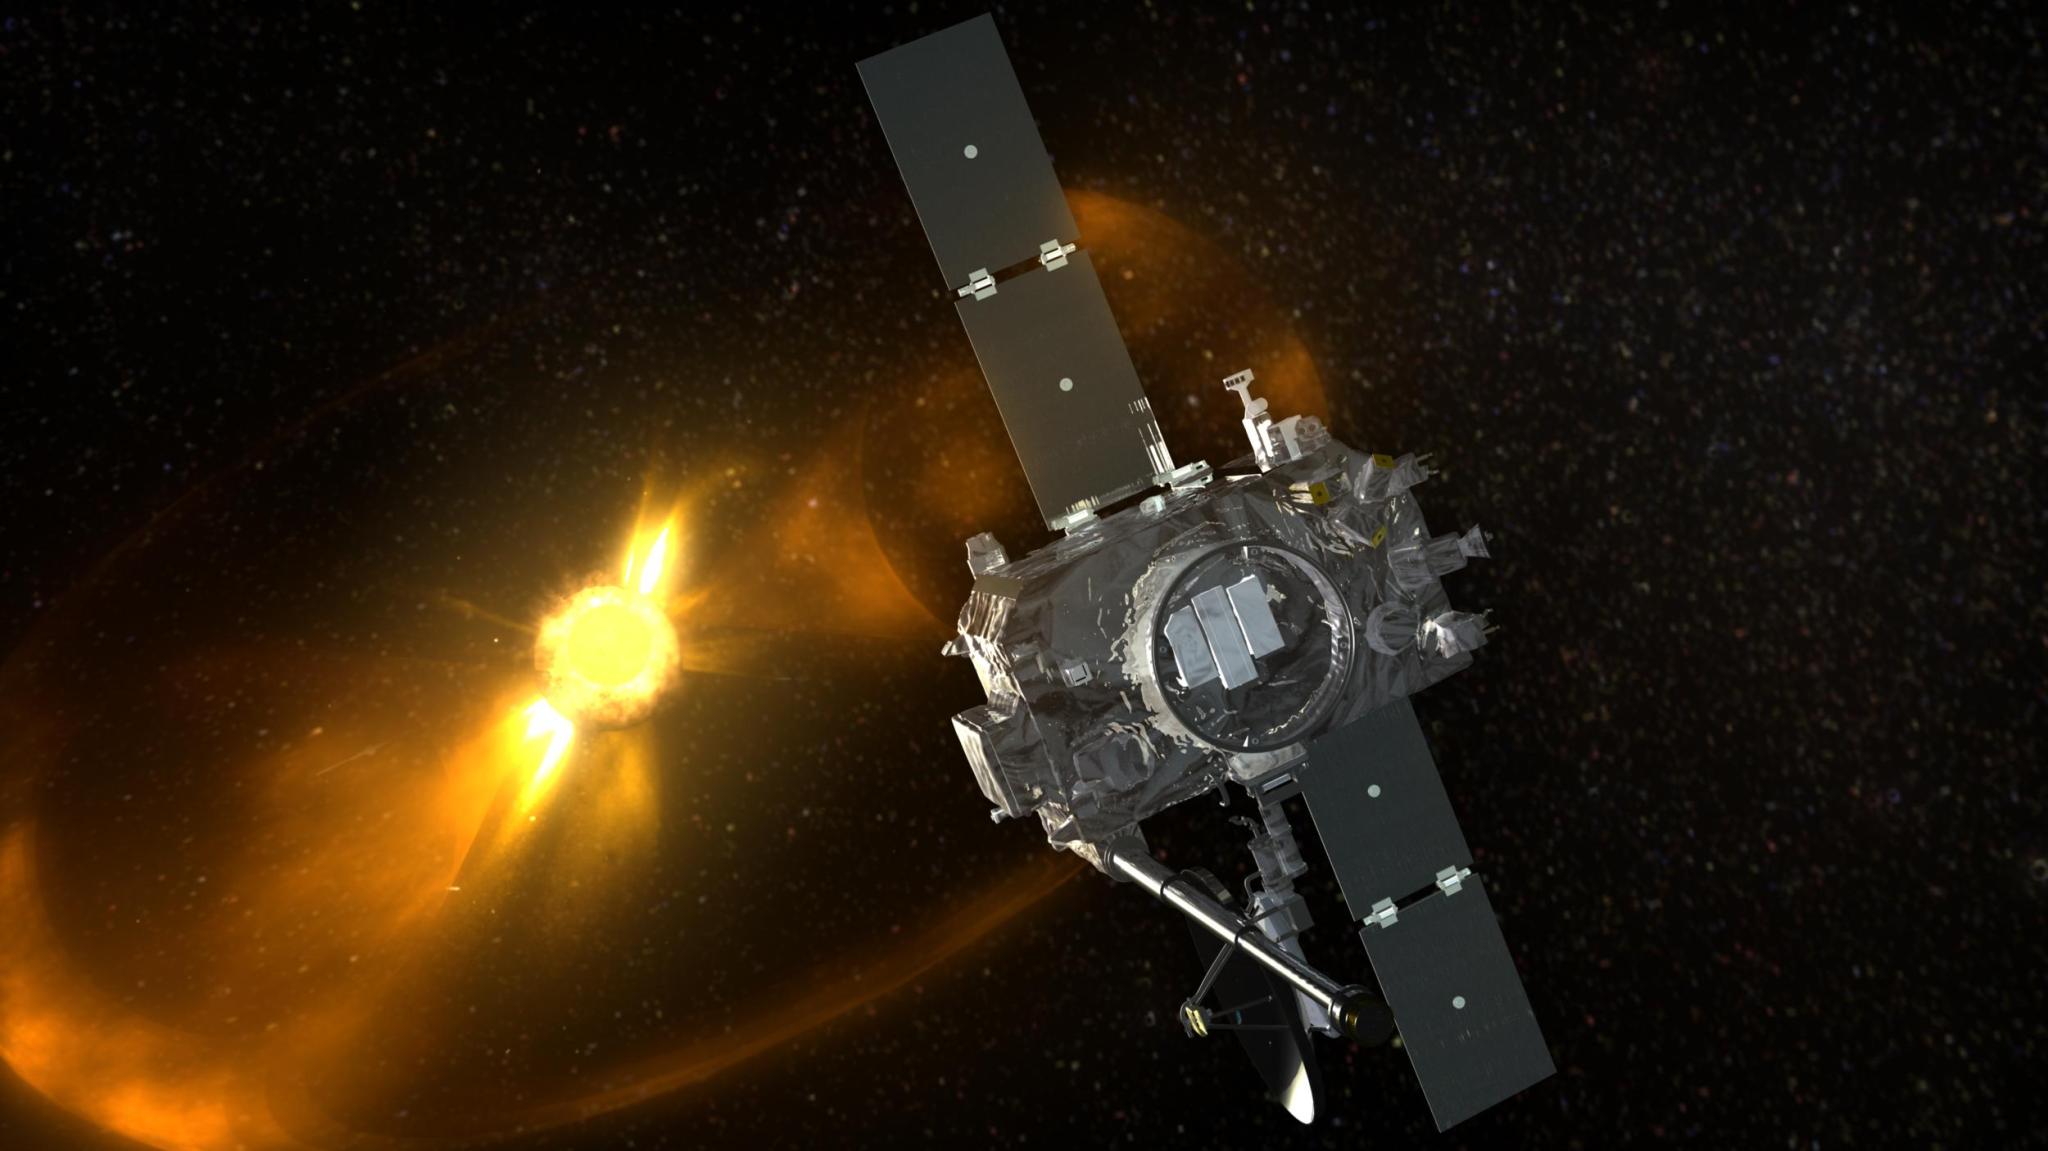 An illustration shows one of the STEREO spacecraft in the foreground and the Sun in the background.